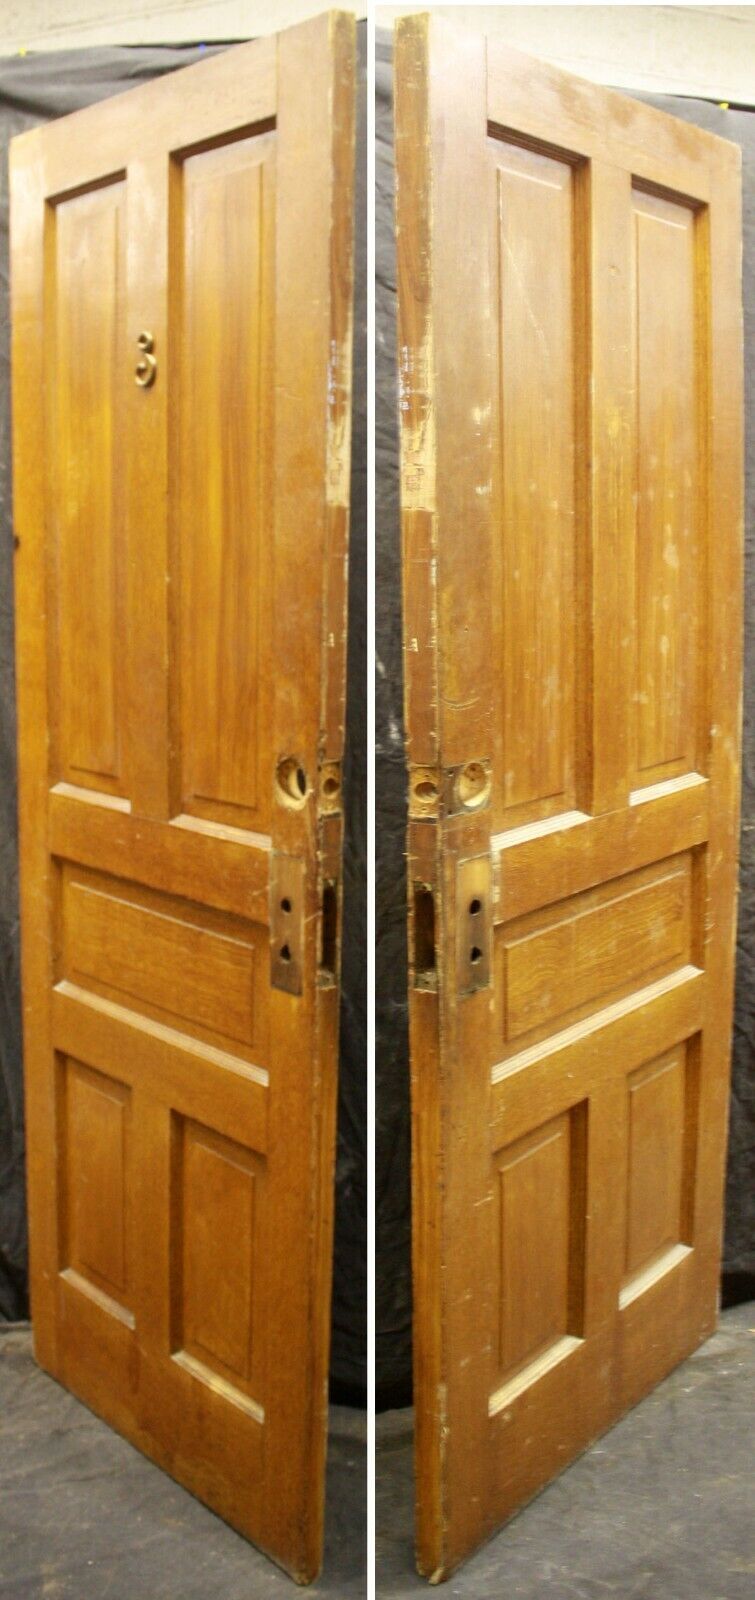 3 available 29.5"x79" Antique Vintage Old Reclaimed Salvaged SOLID Wood Wooden Interior Doors 5 Panels